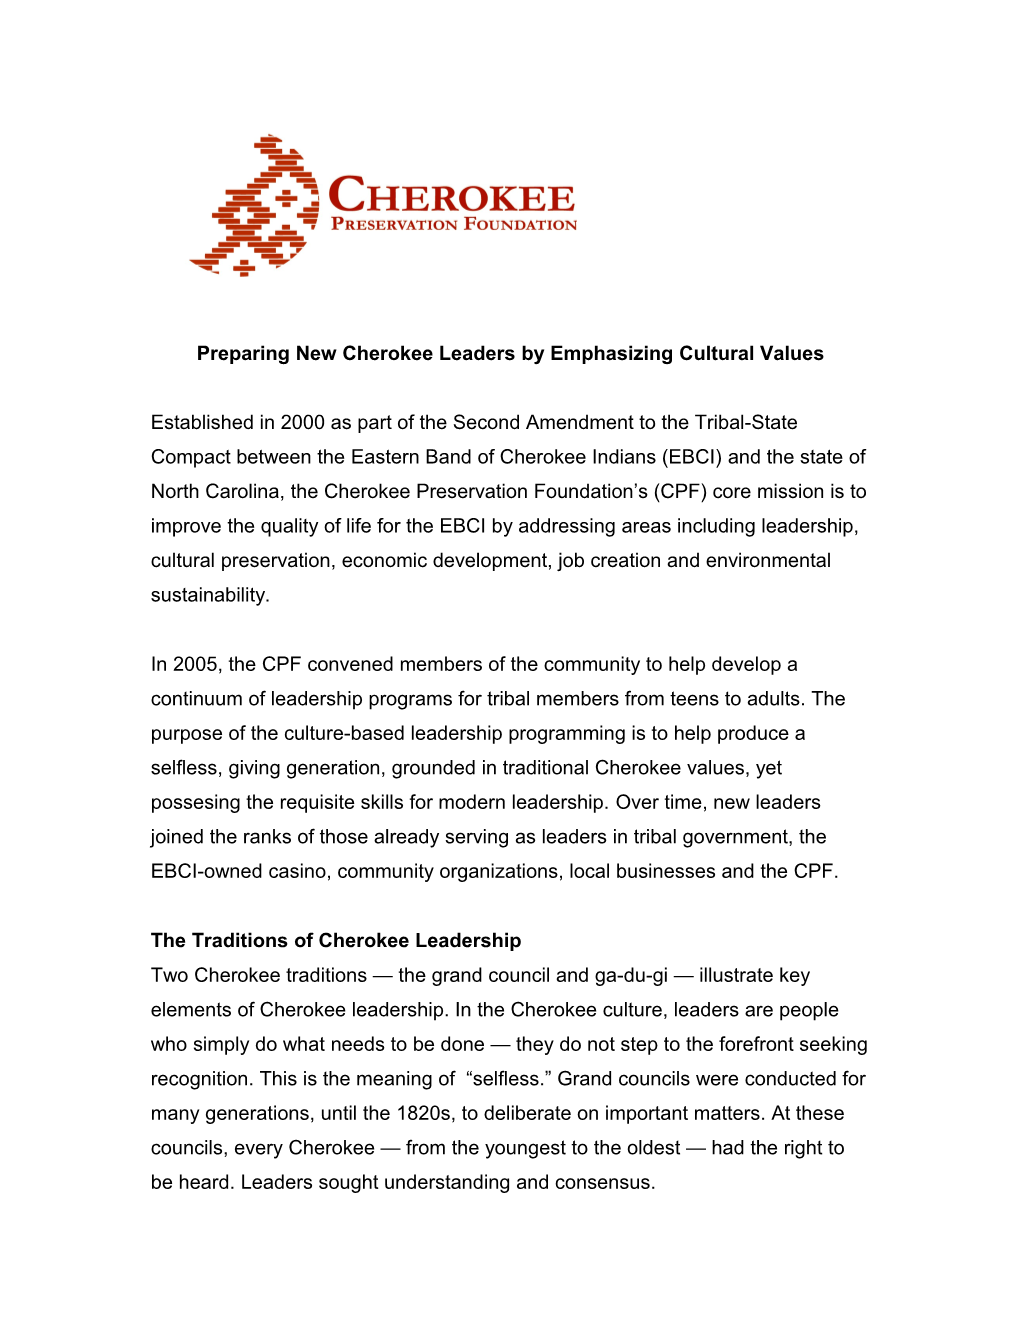 Preparing New Cherokee Leaders by Emphasizing Cultural Values